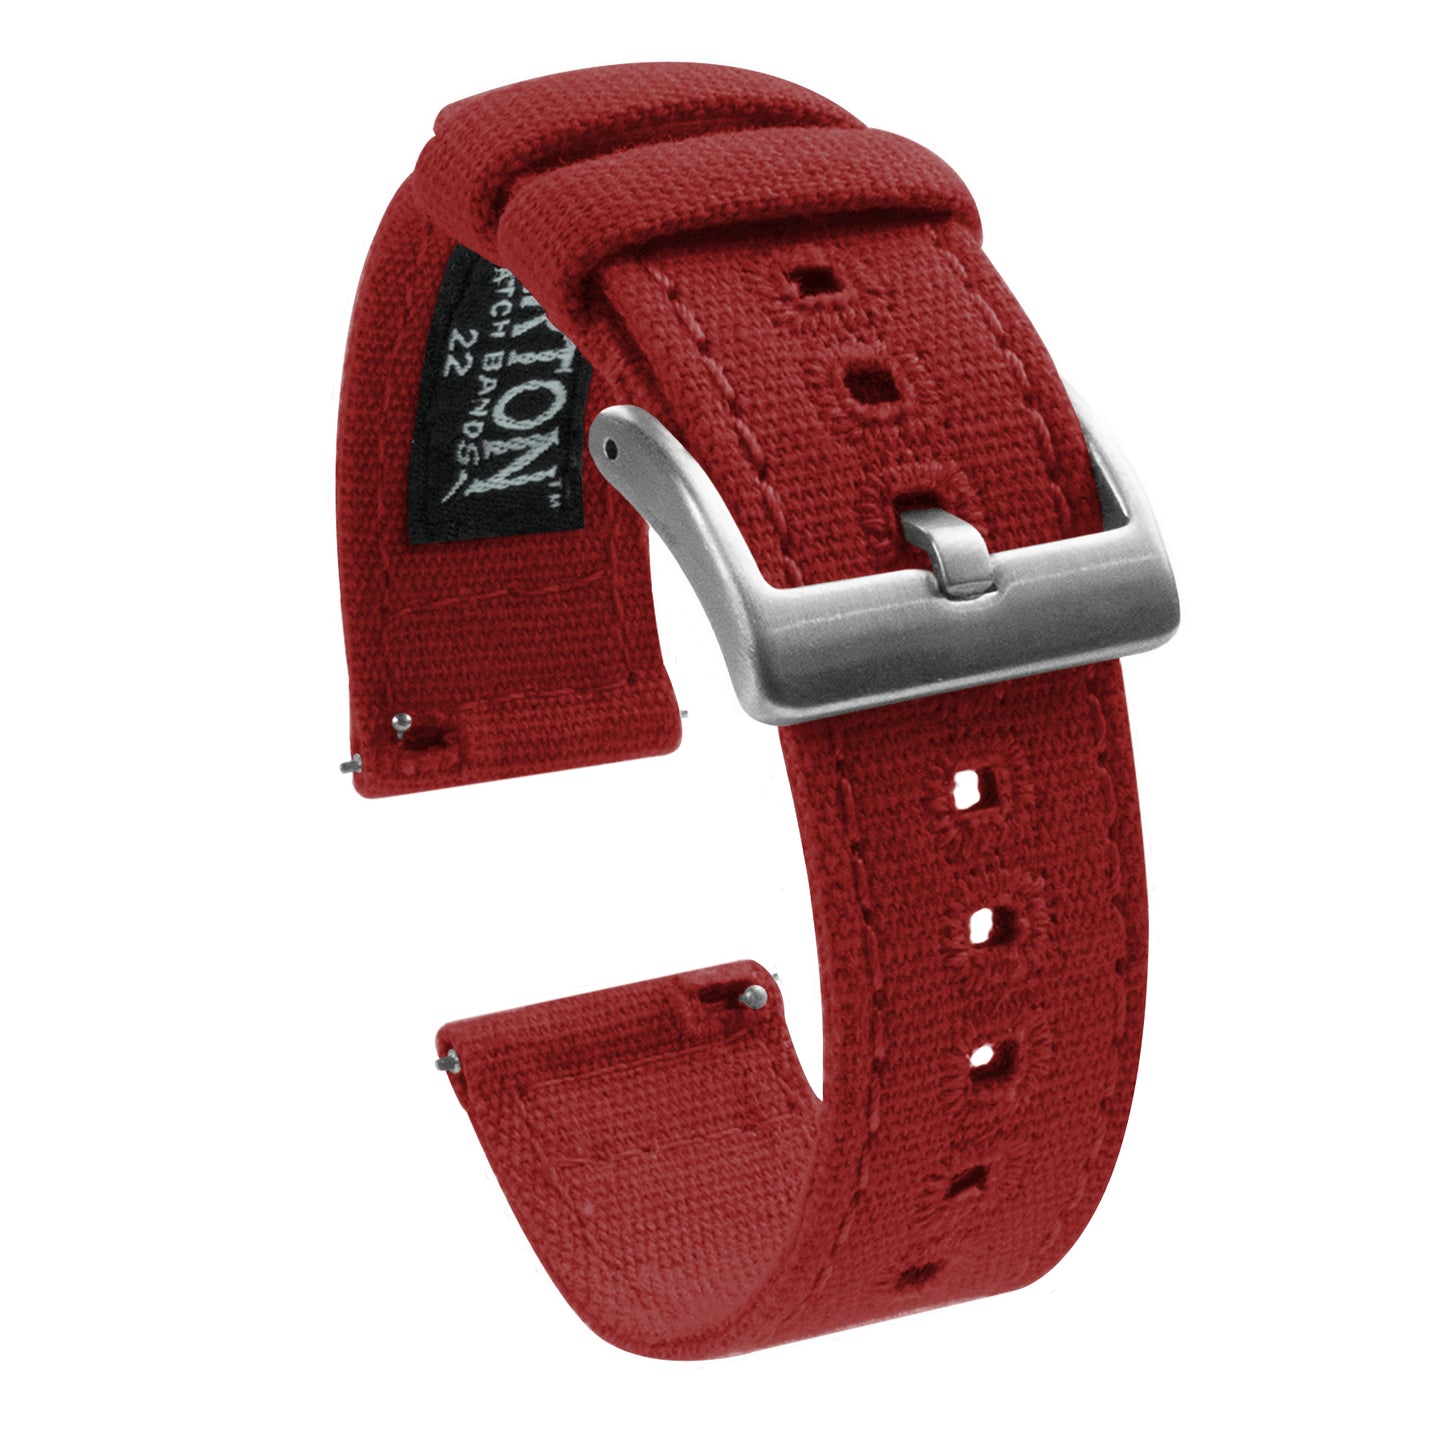 Timex Weekender Expedition Watches Crimson Red Canvas Watch Band